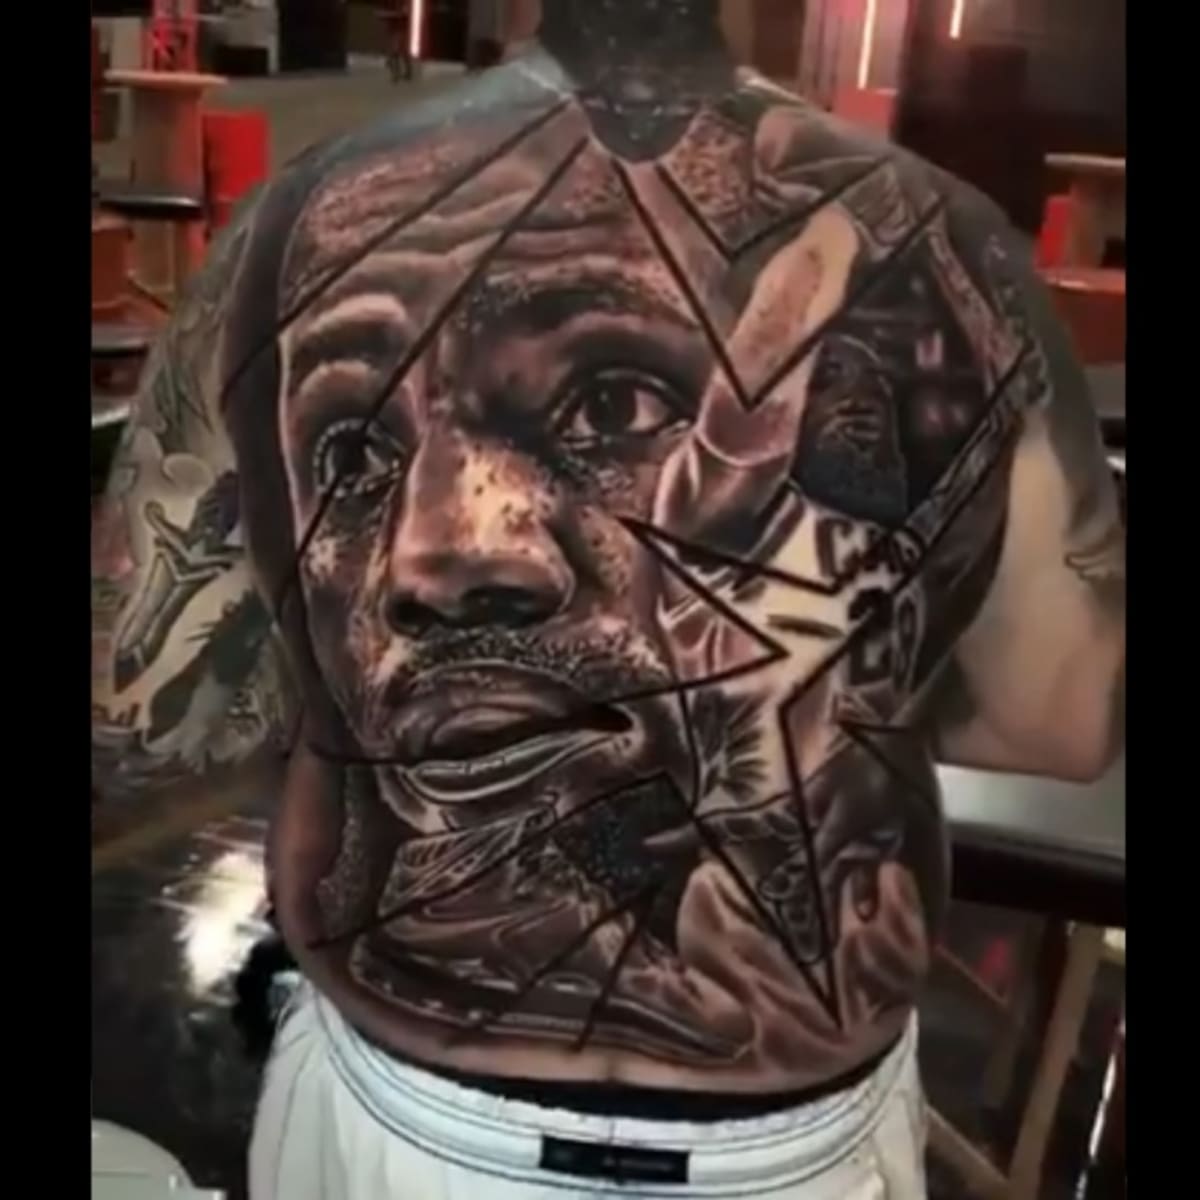 101 Best Lebron James Tattoo Ideas You Have To See To Believe! | Lebron  james tattoos, Lebron james, Back ear tattoo